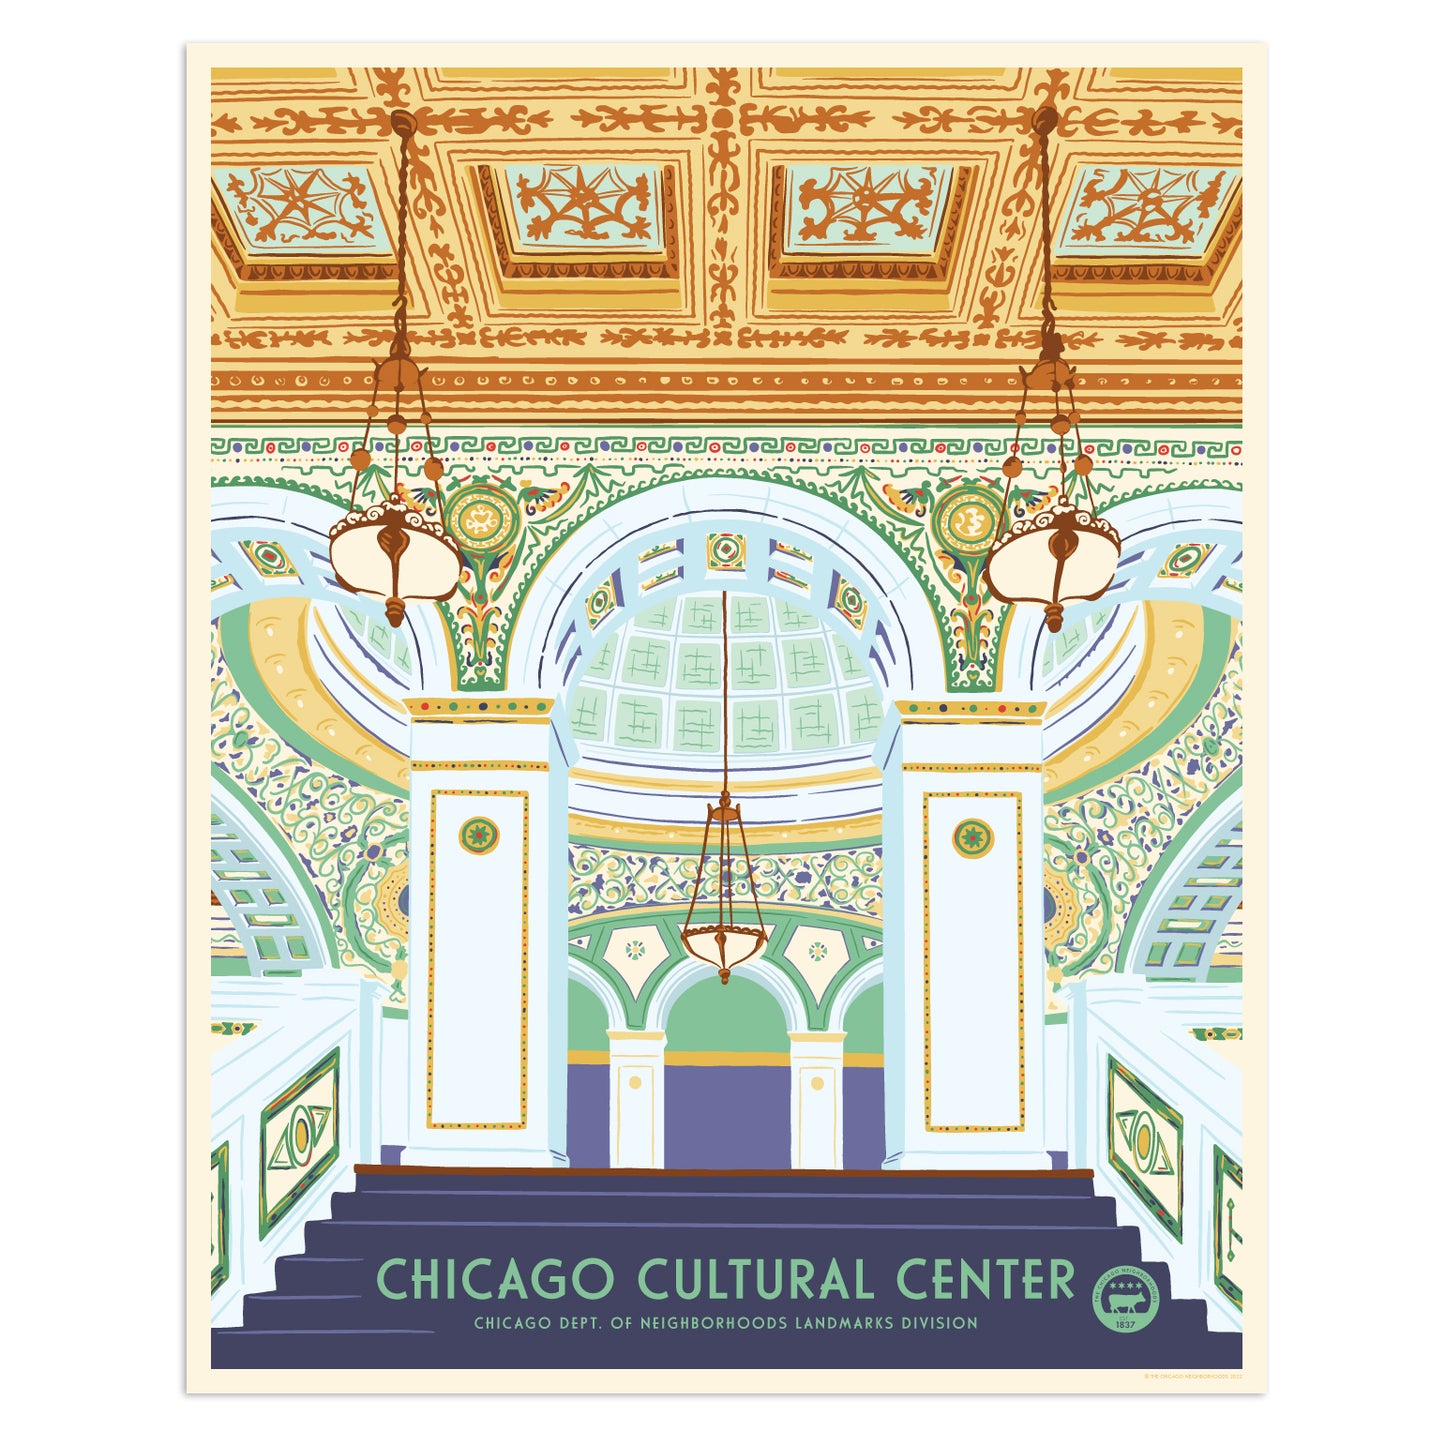 Chicago Cultural Center 16" x 20" WPA-Style Tourism Poster